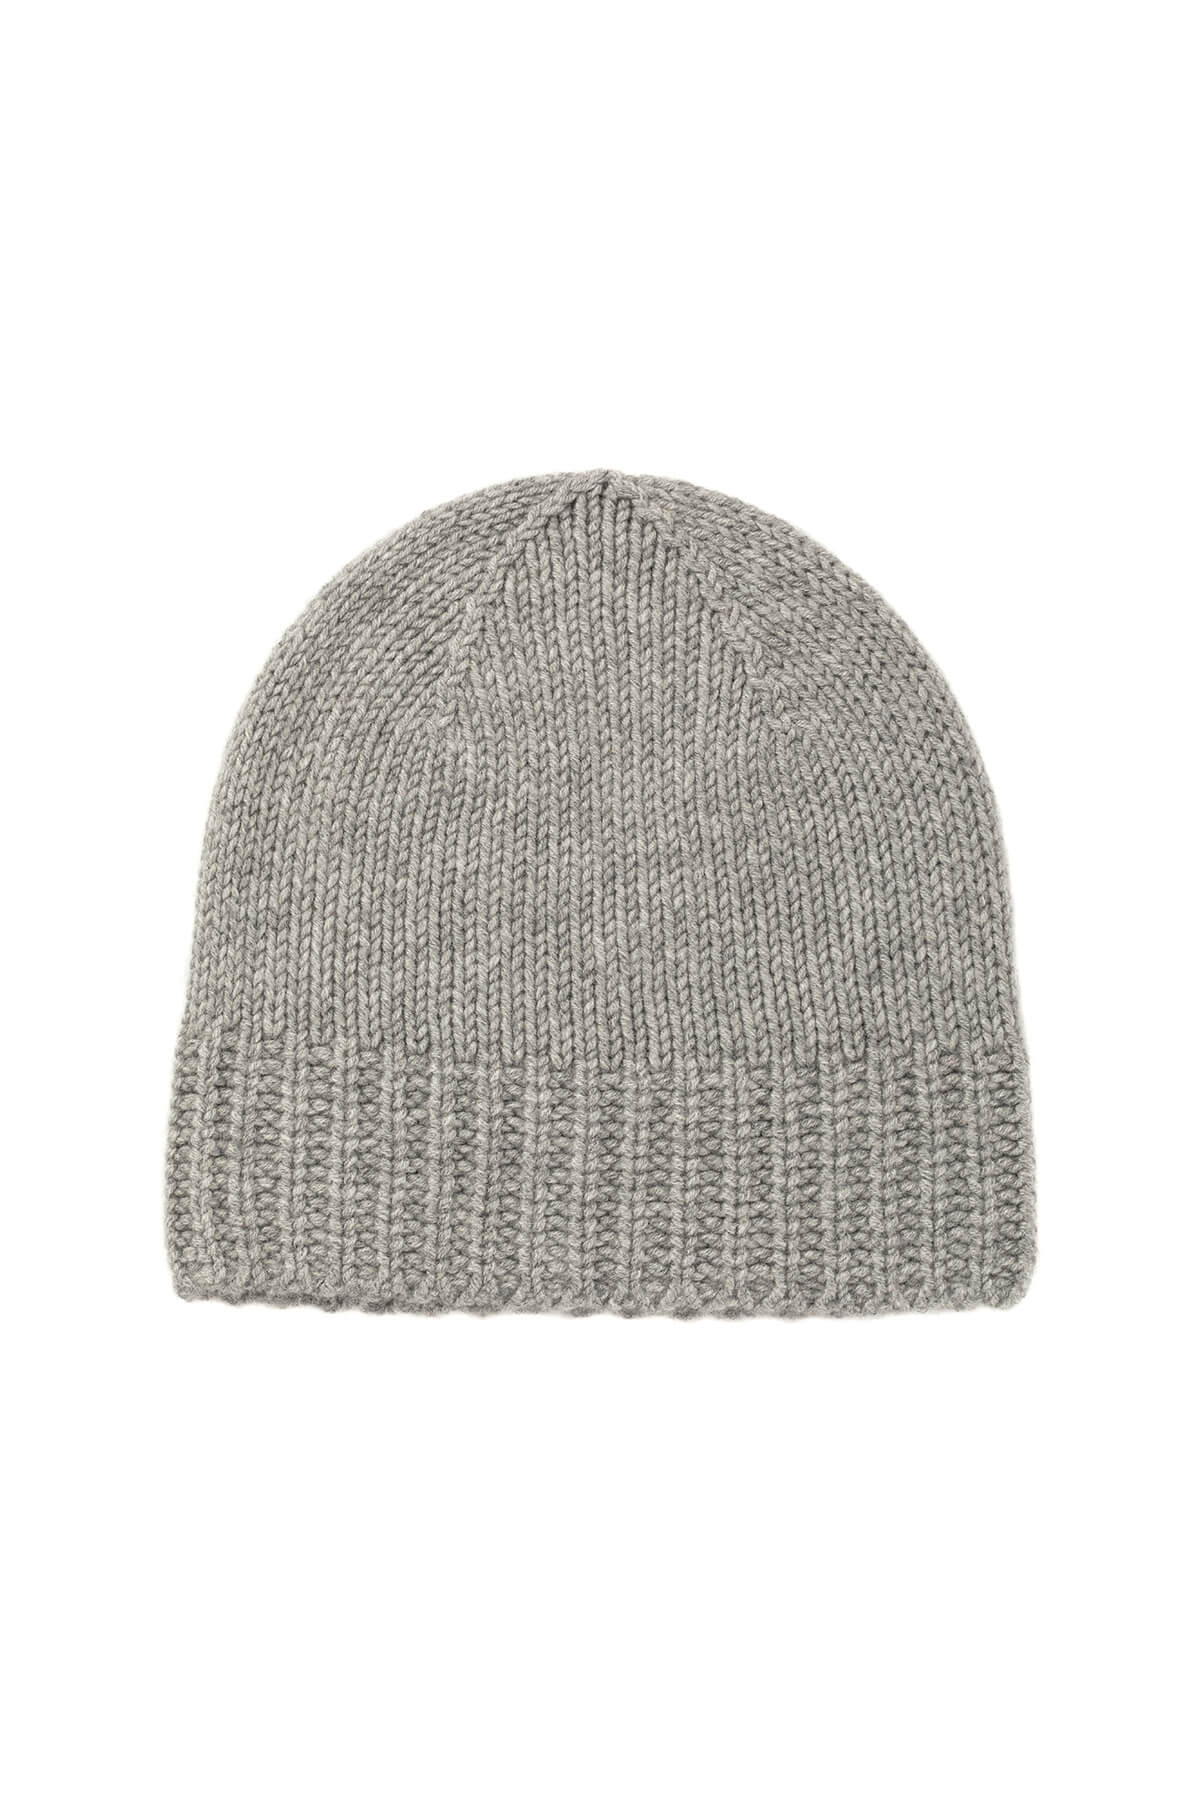 Johnstons of Elgin’s Light Grey Jersey Cuff Cashmere Beanie on white background HAT03246HA0308